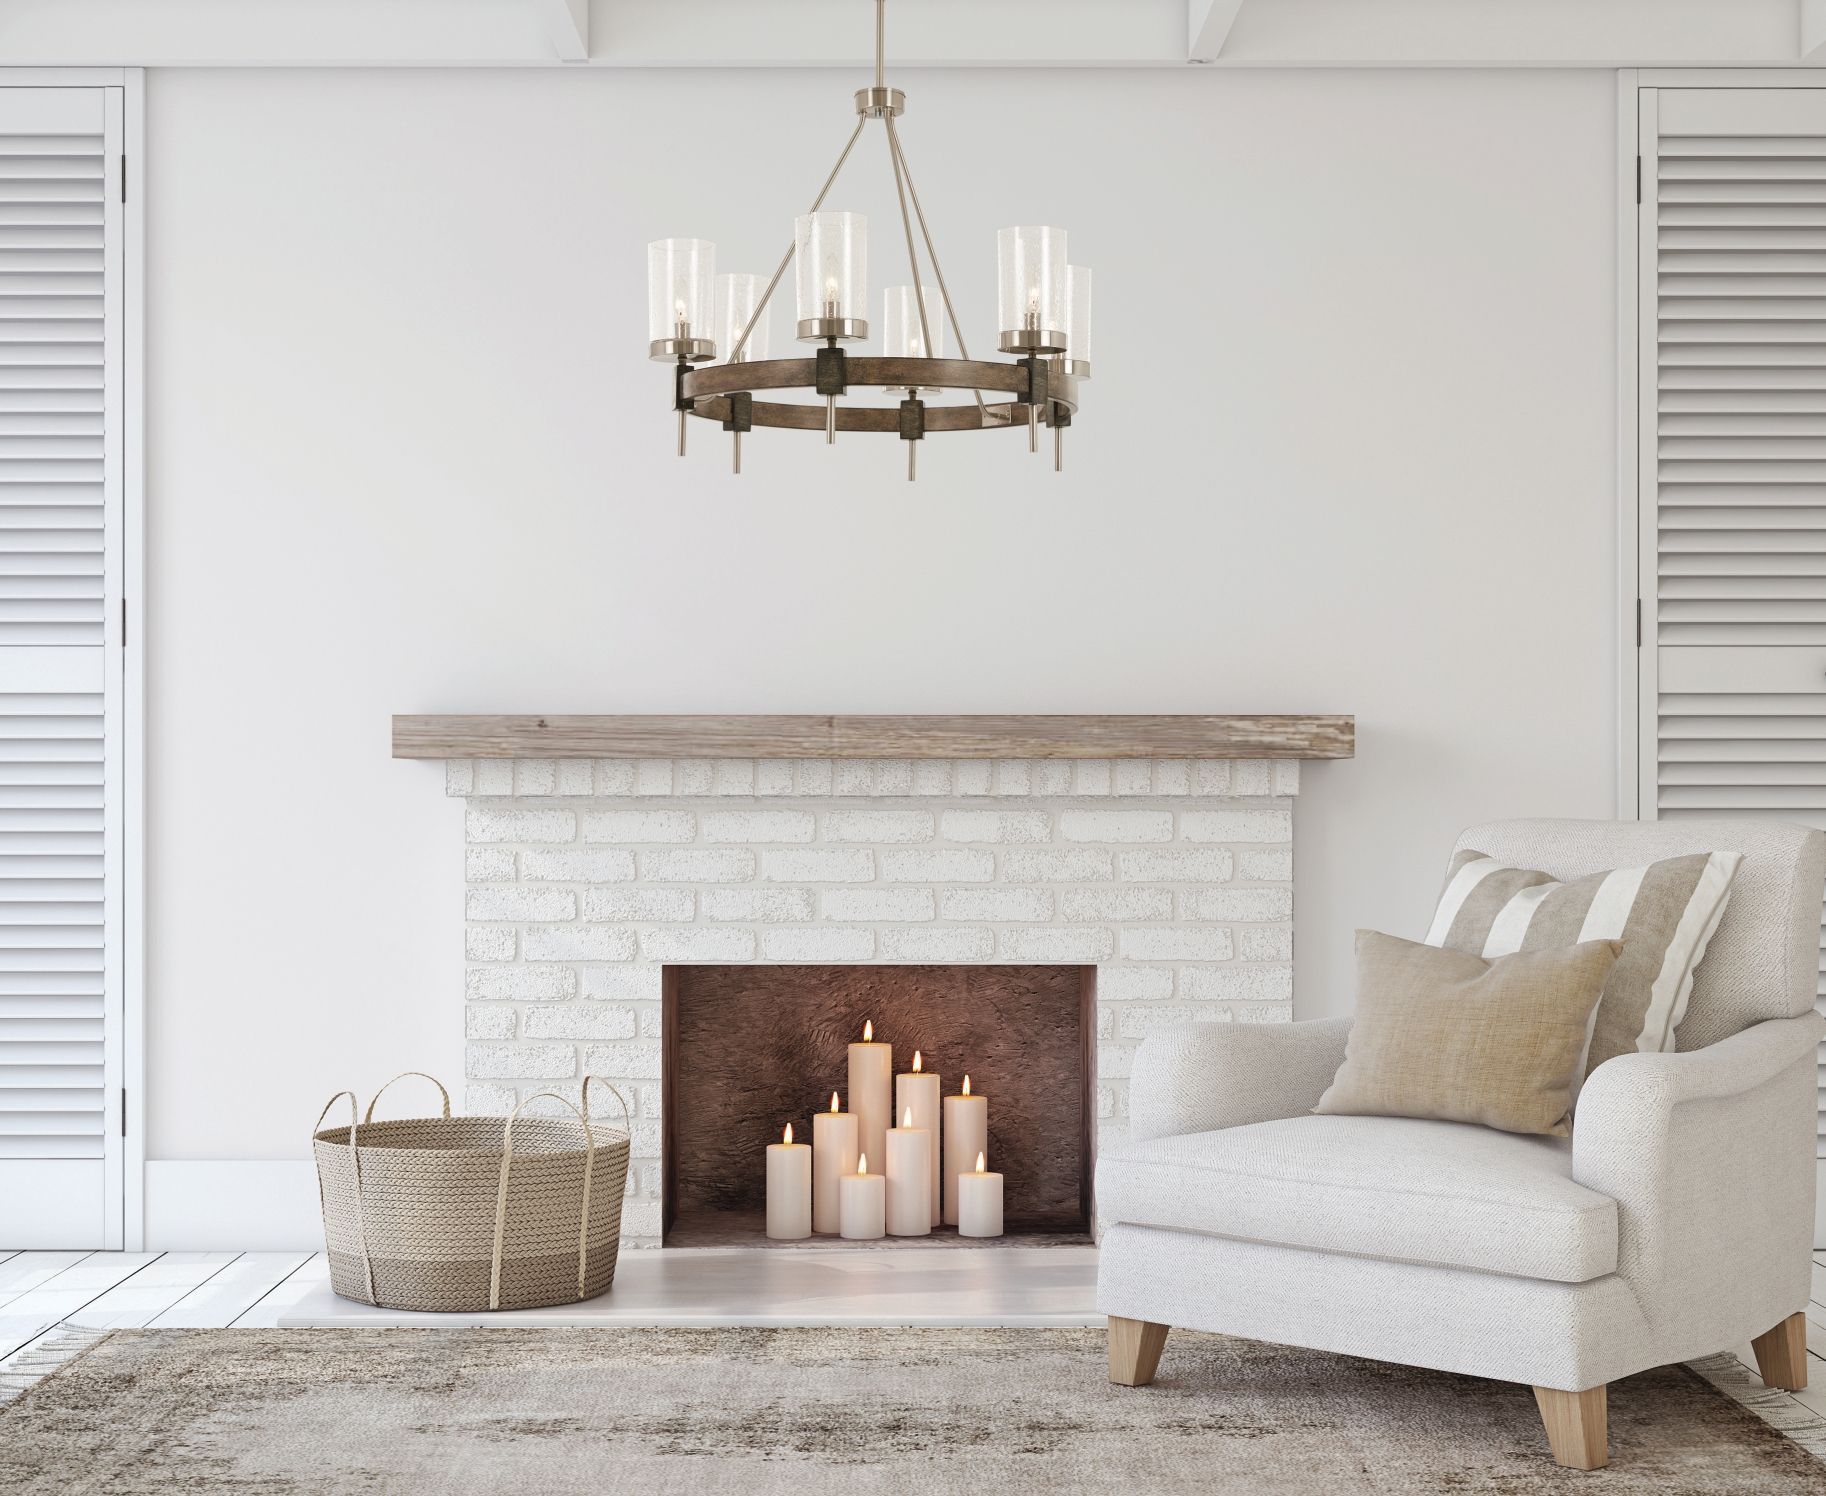 Minka Lavery Bridlewood 6 Light Chandelier In Stone Grey Regarding Stone Grey With Brushed Nickel Six Light Chandeliers (View 12 of 15)